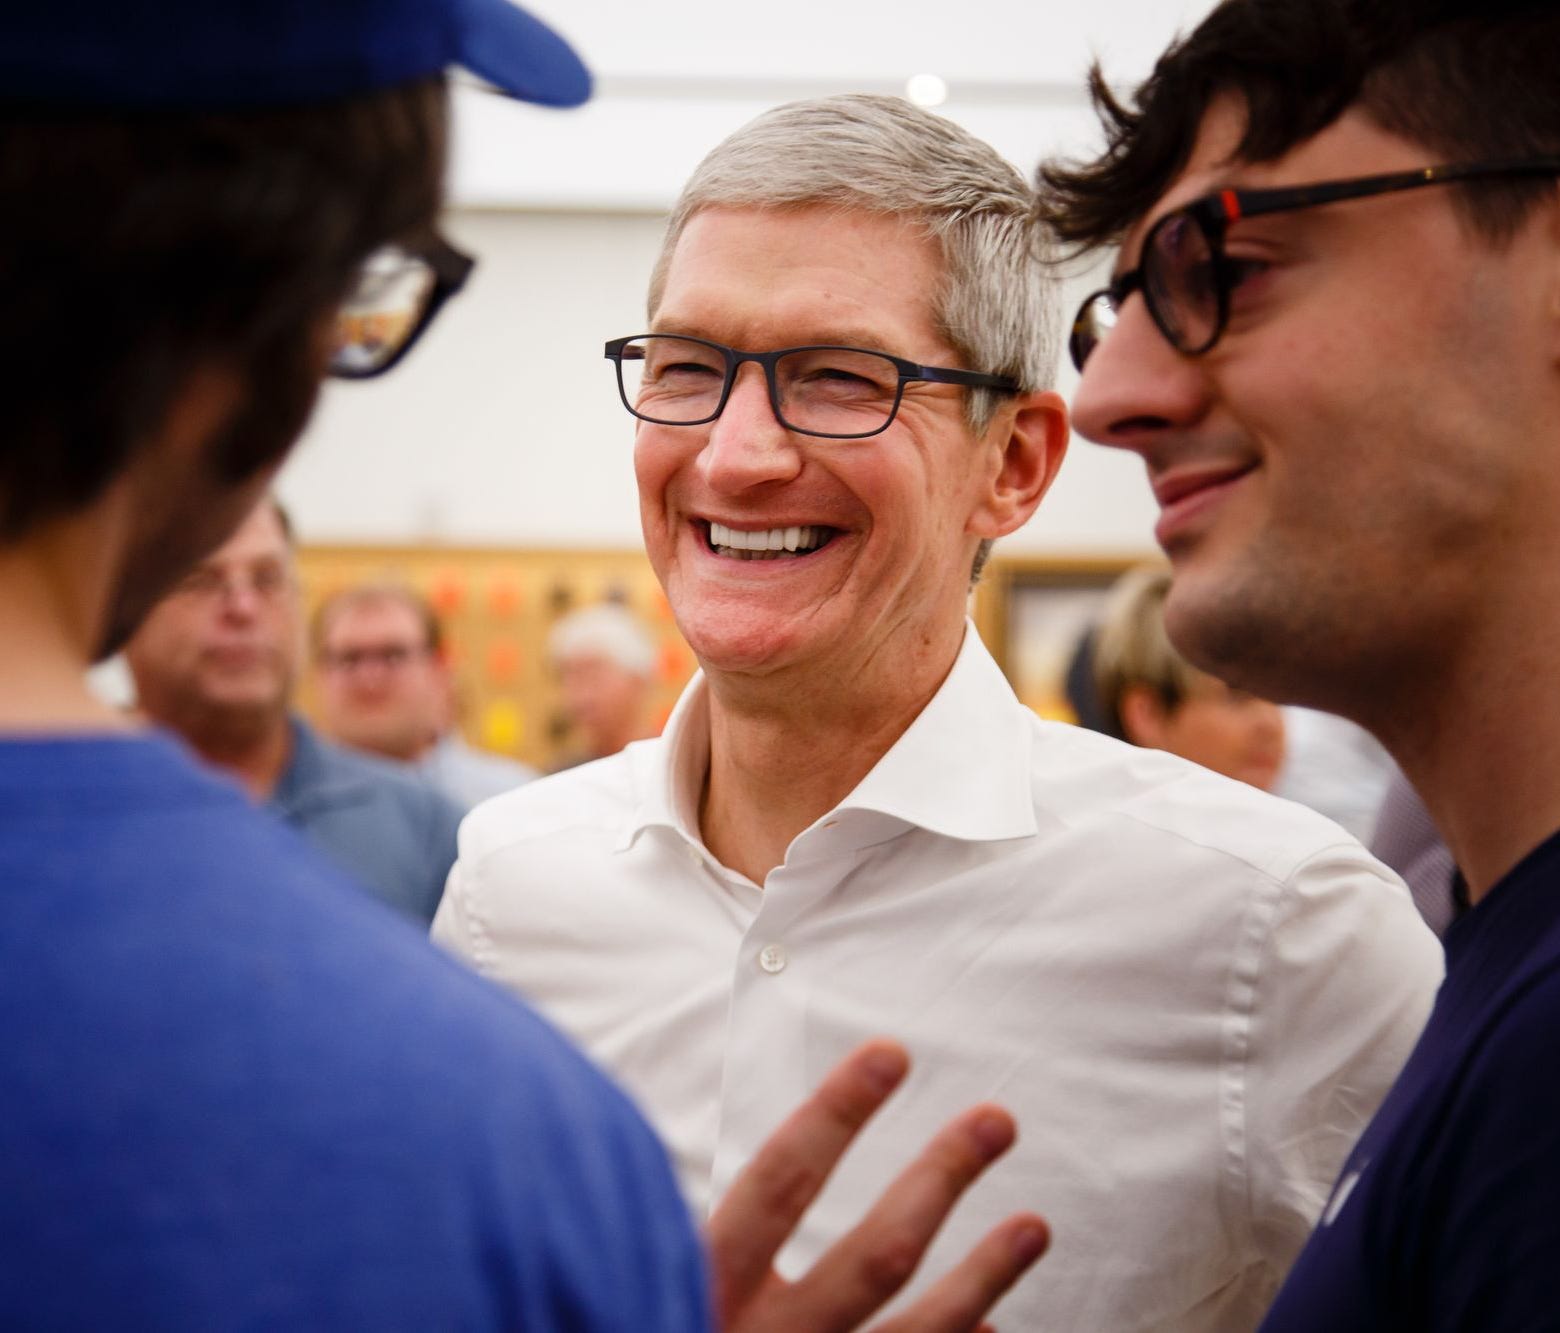 Apple CEO Tim Cook talks with employees on a visit to the West Des Moines Apple Store on Aug. 24, 2017. Cook was in Iowa announcing the company's plans for its $1.375 billion data center in Waukee, Iowa.